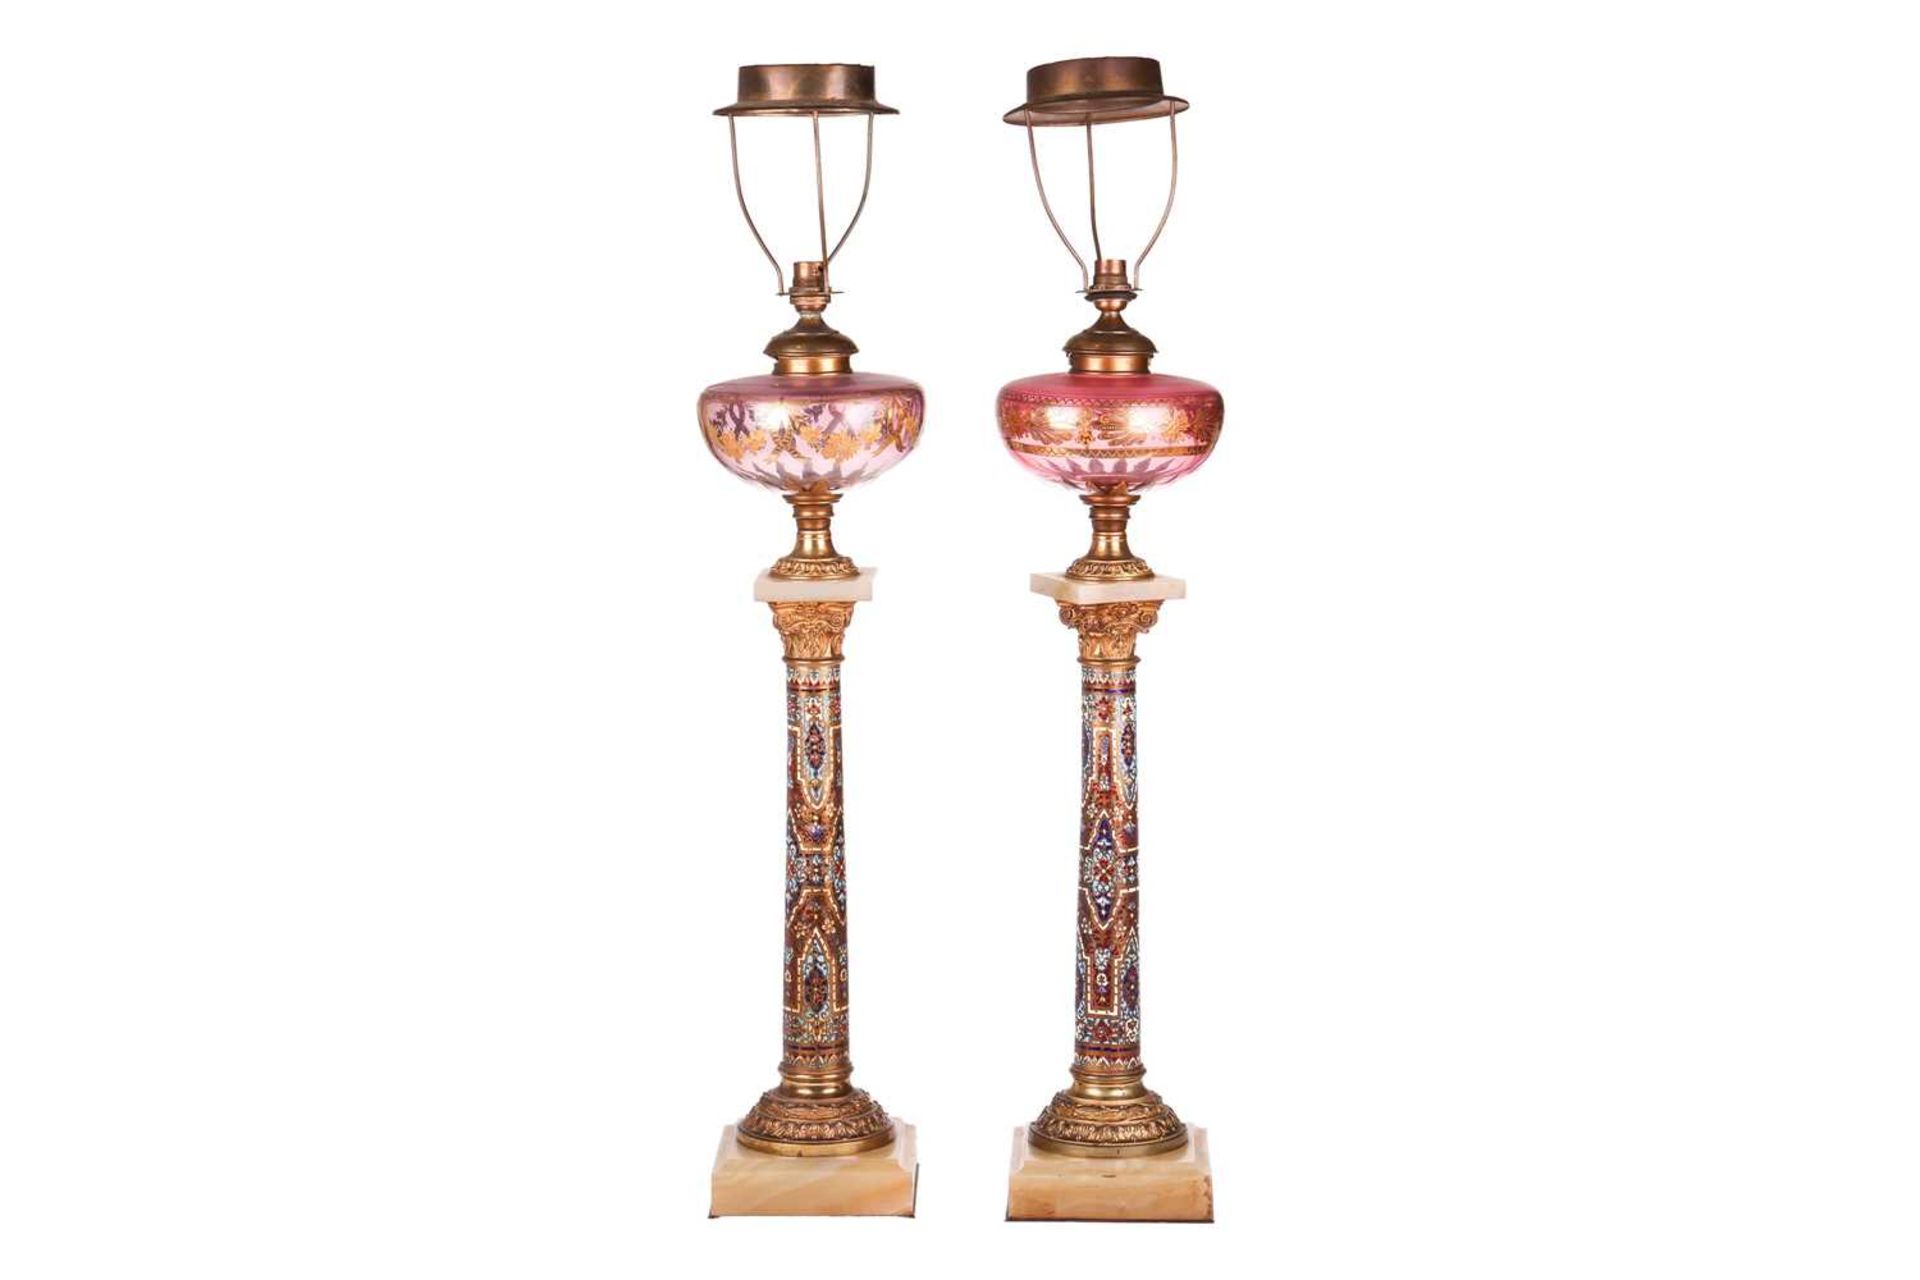 A pair of 19th-century French onyx, gilt metal and champléve enamel oil lamp bases of Corinthian col